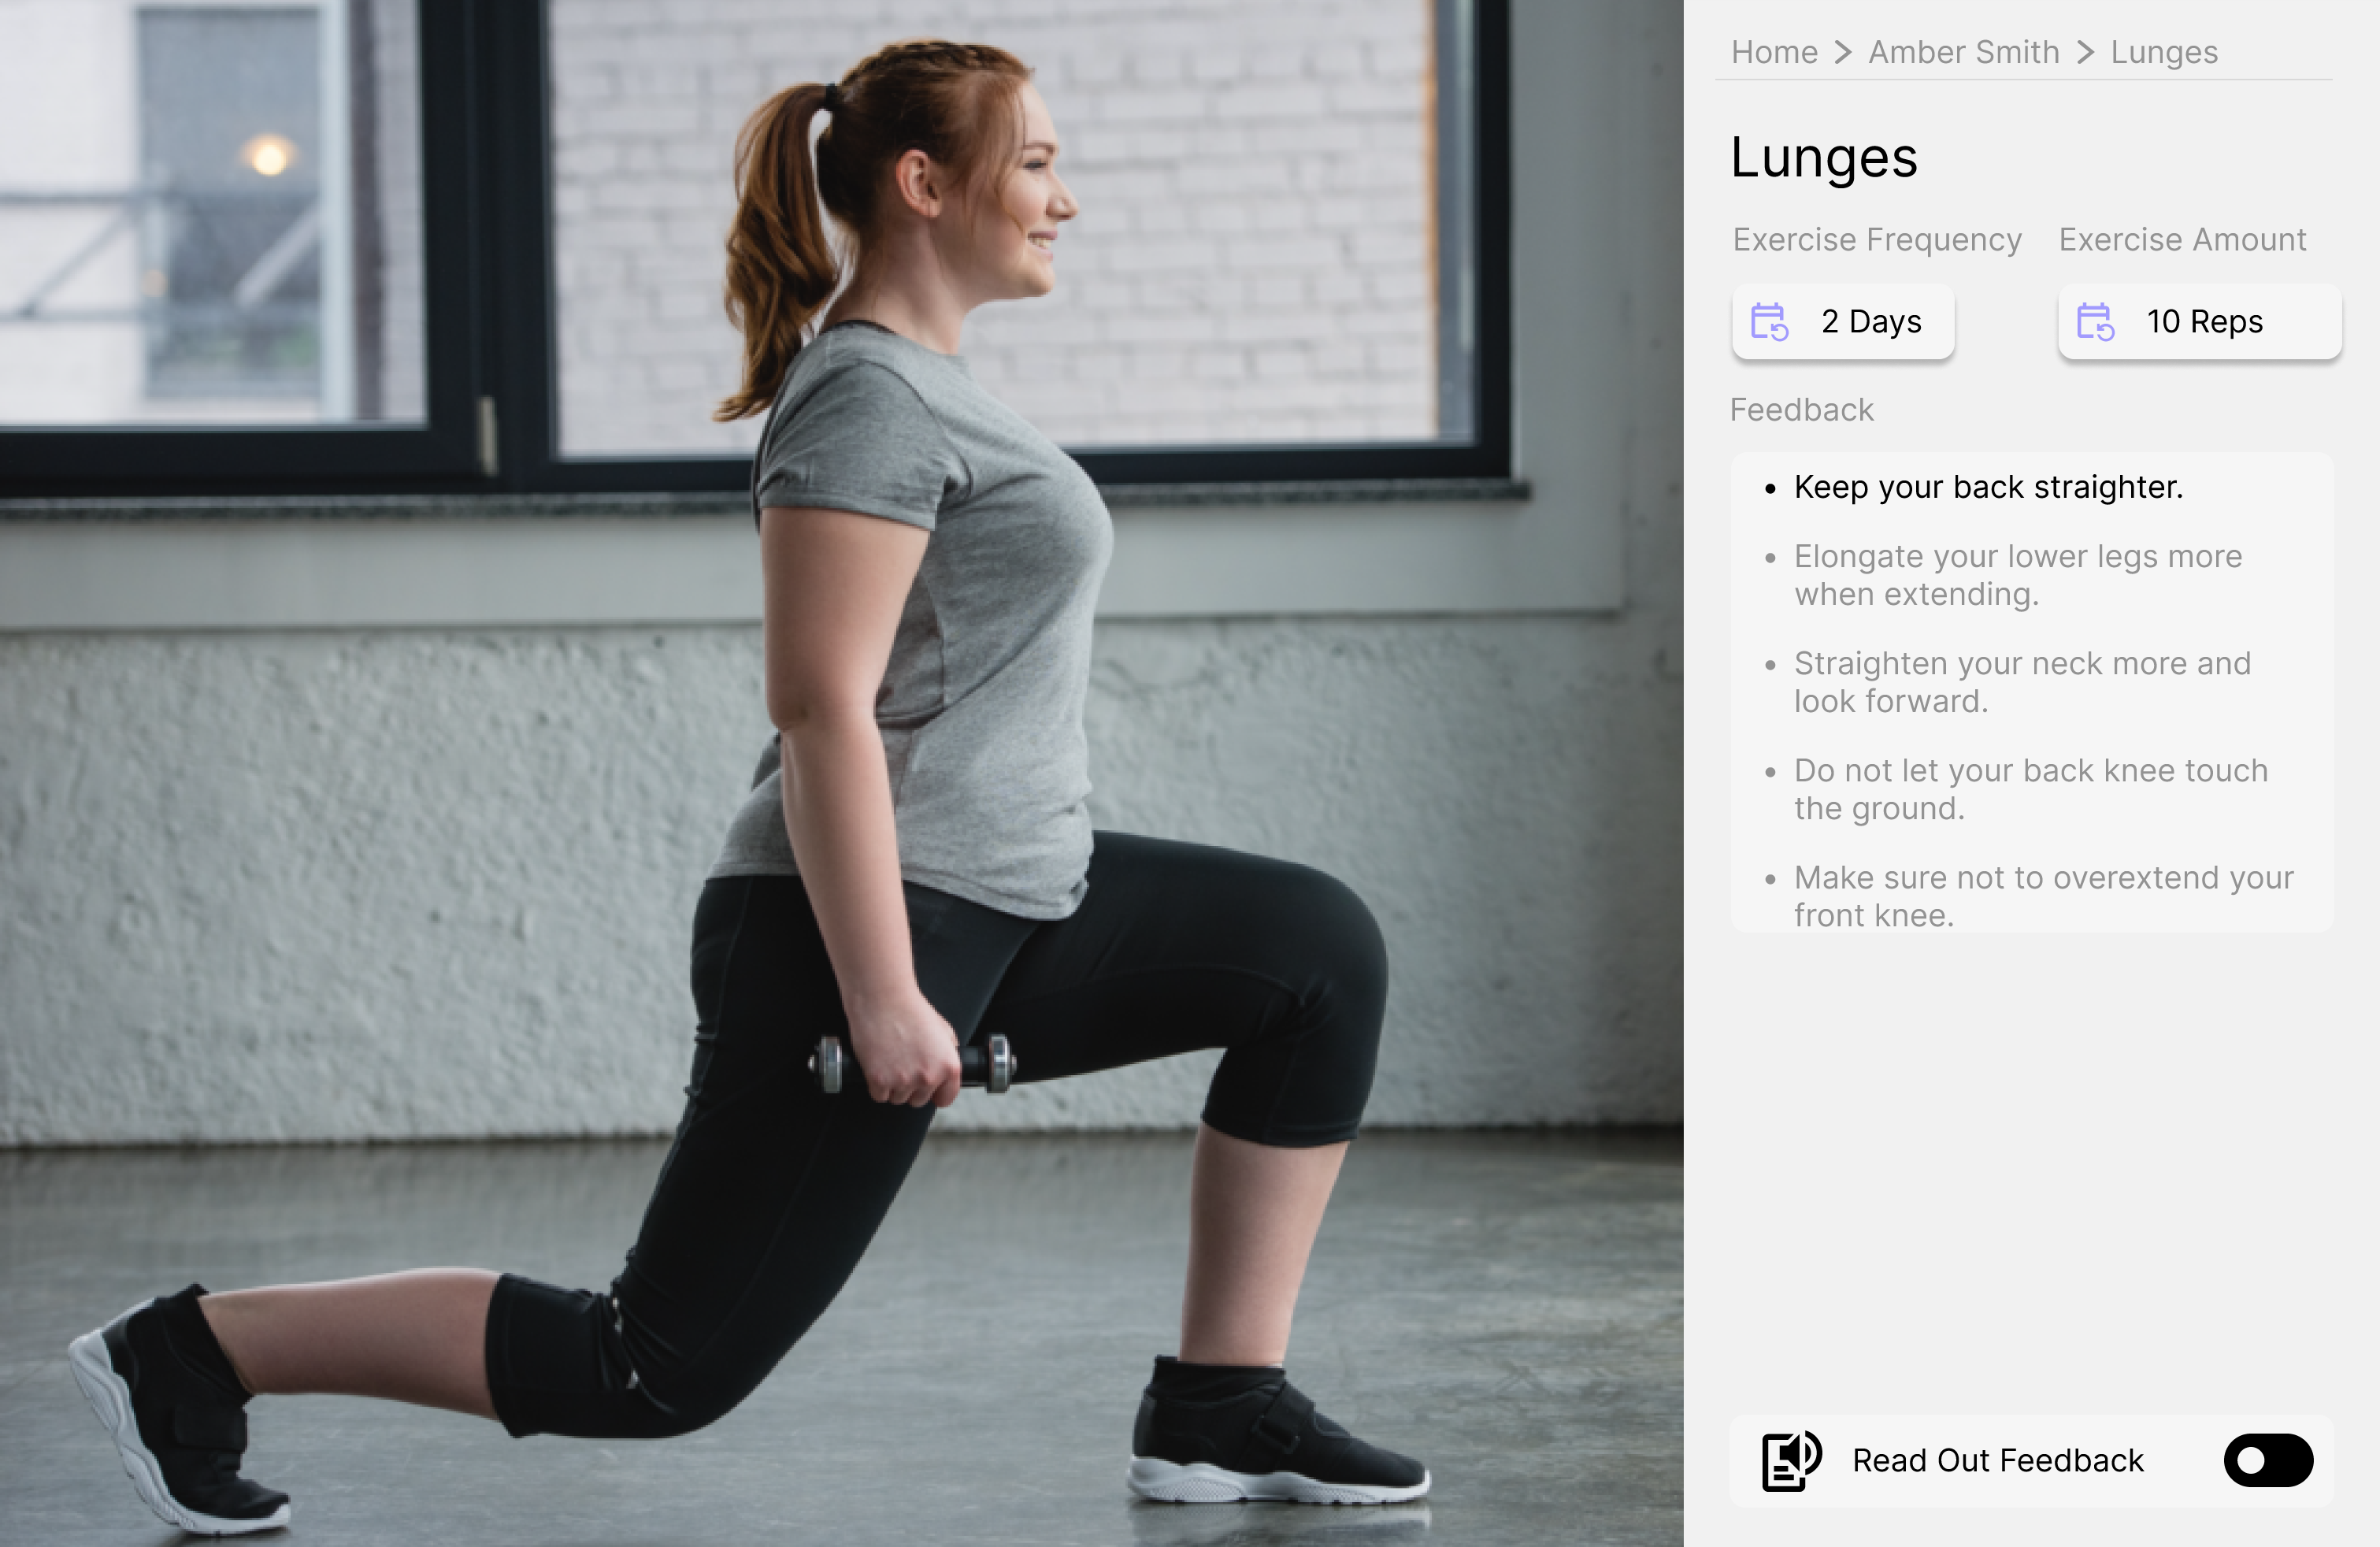 A woman lunges with small weights next to description of exercise